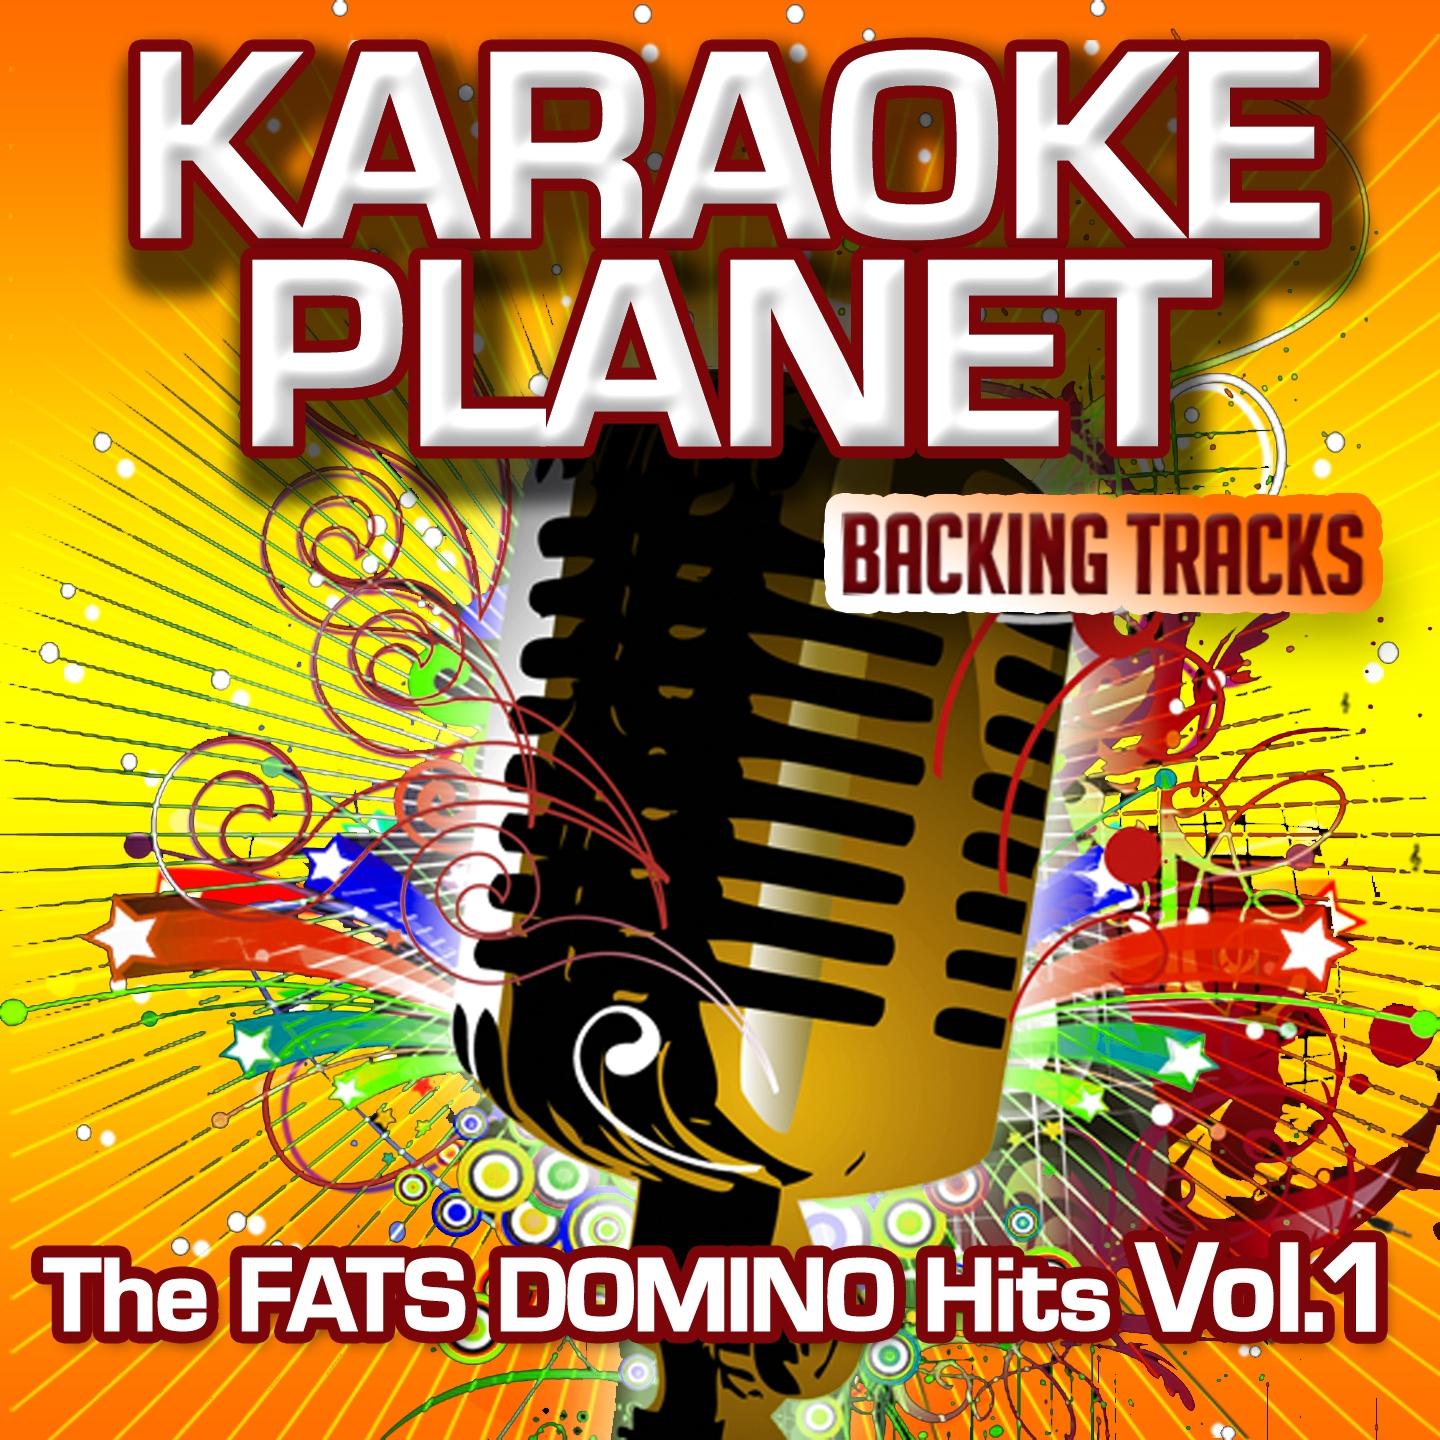 I Want to Walk You Home (Karaoke Version In the Art of Fats Domino)